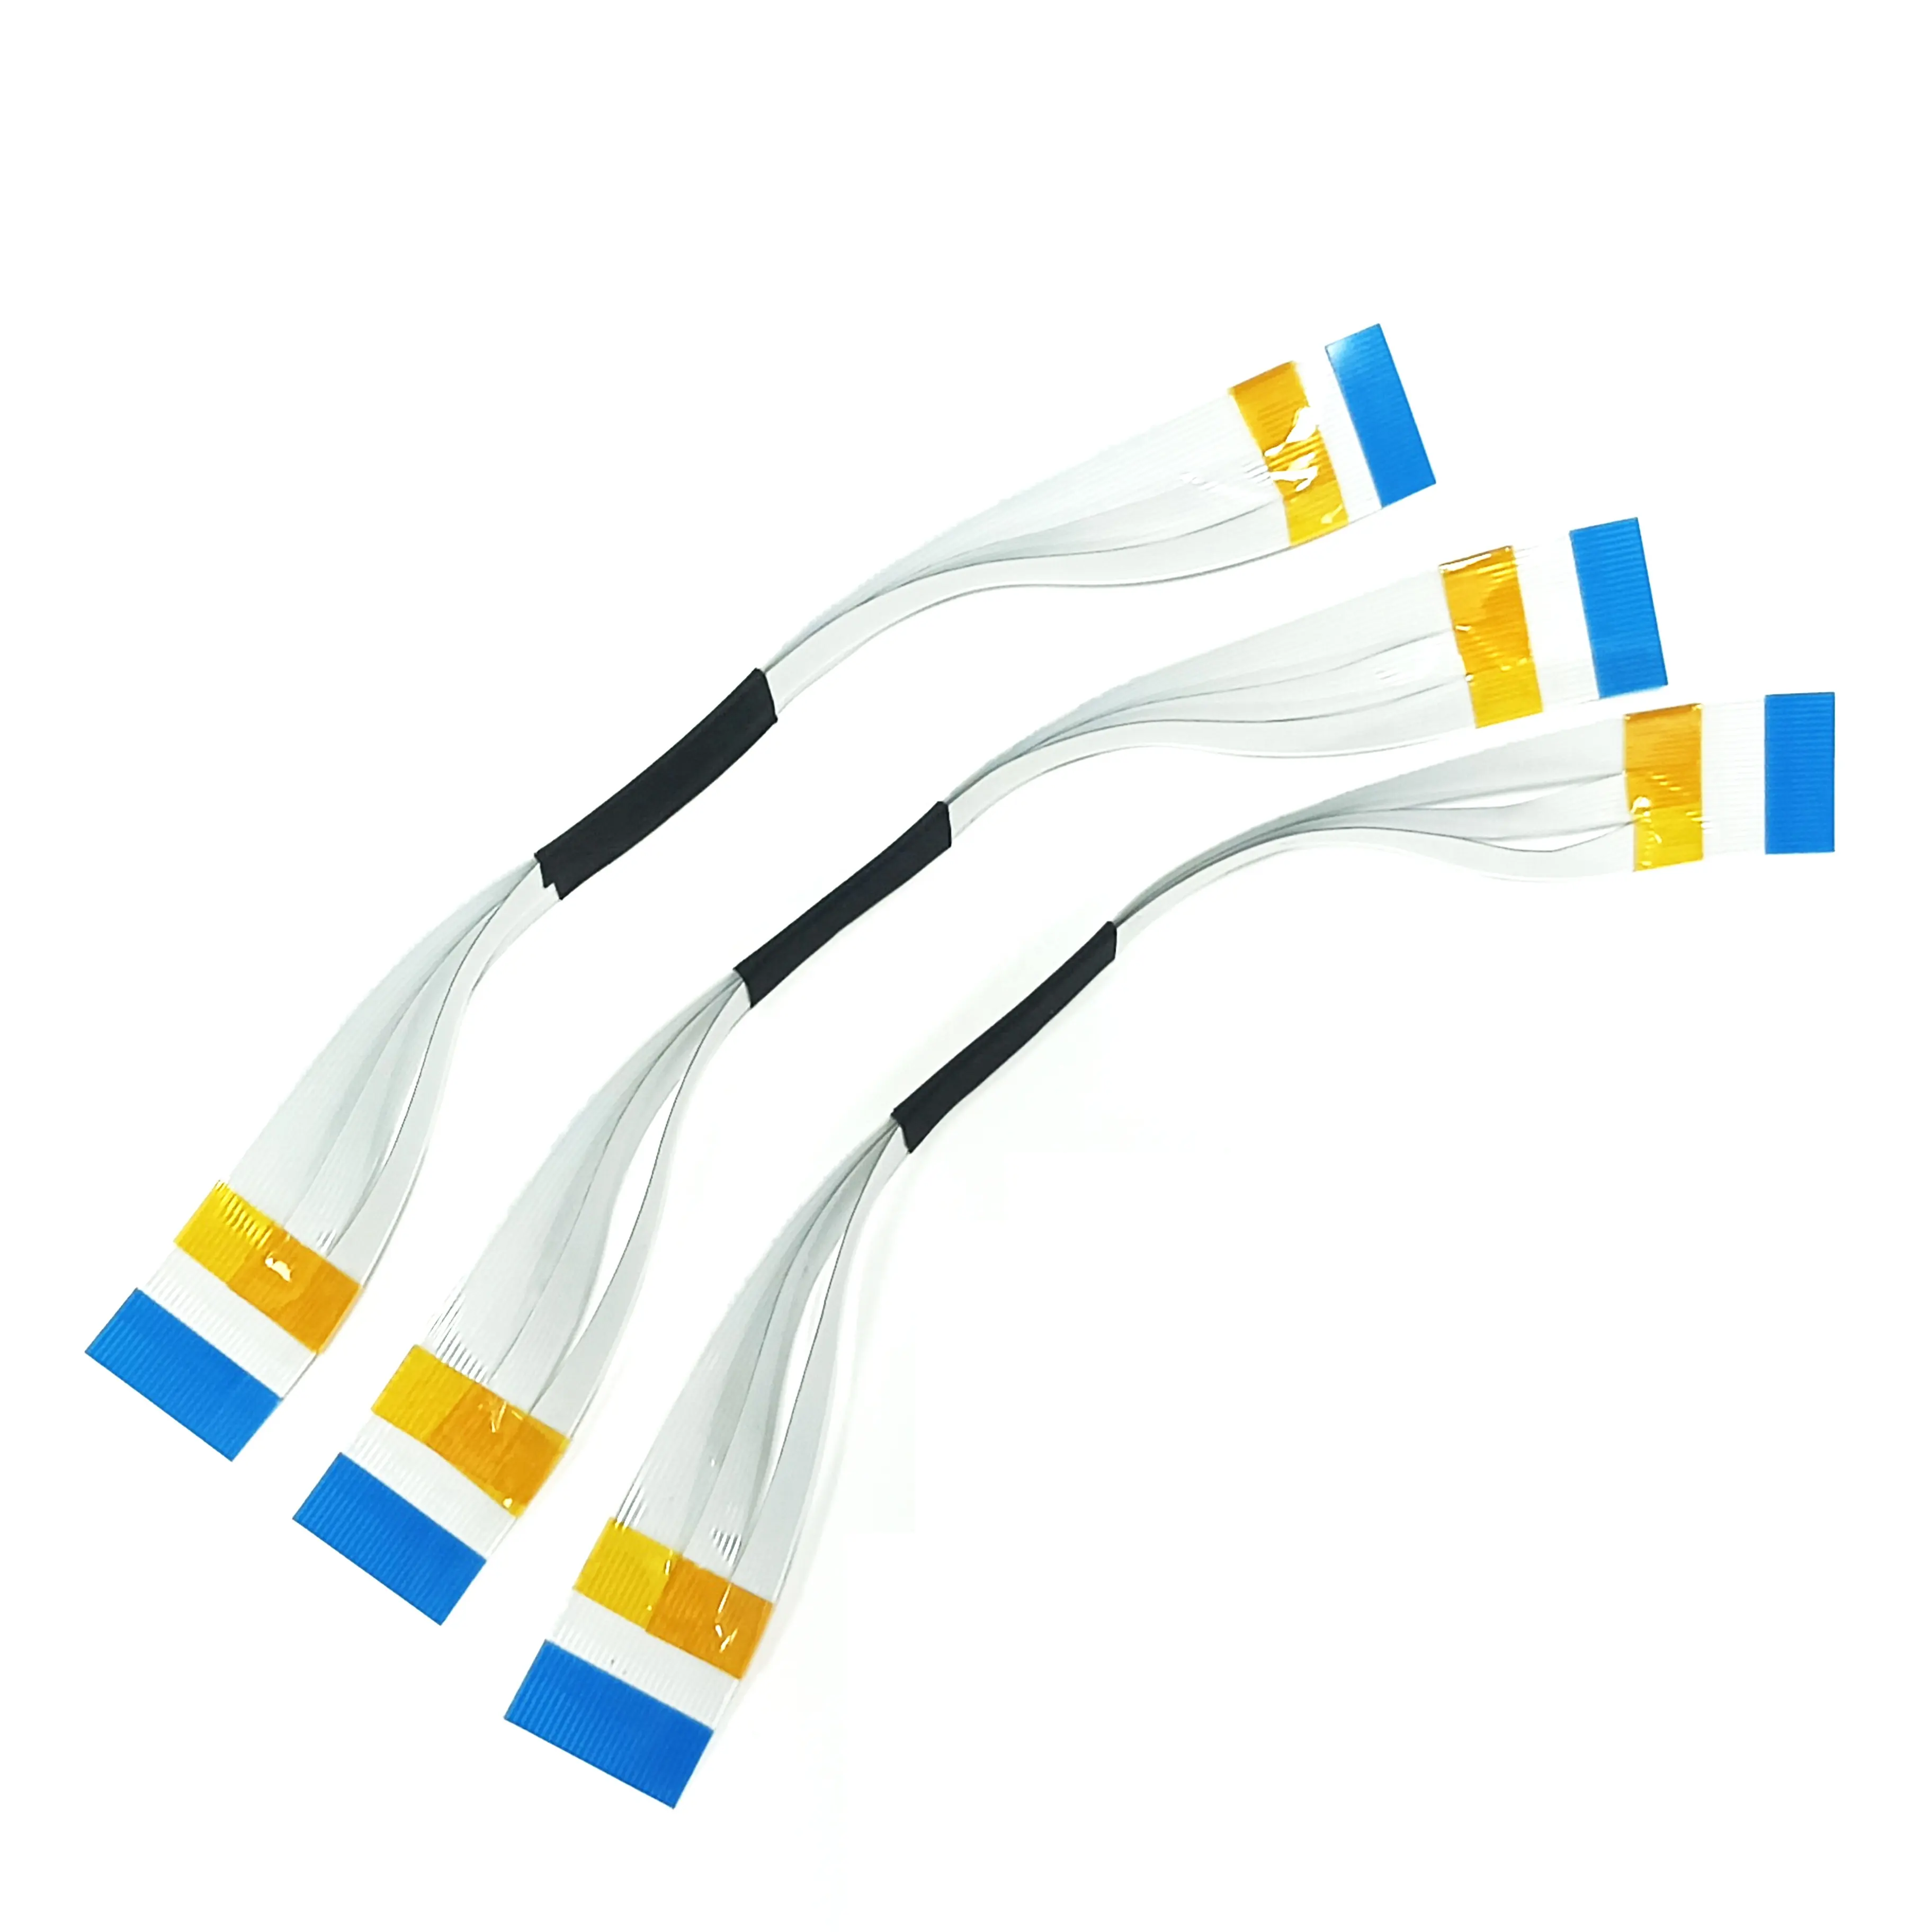 Custom AWM 20624 80c 60v vw-1 0.5mm 1mm Pitch Cable With Conductive FFC FPC Flexible Flat Cable Assembly